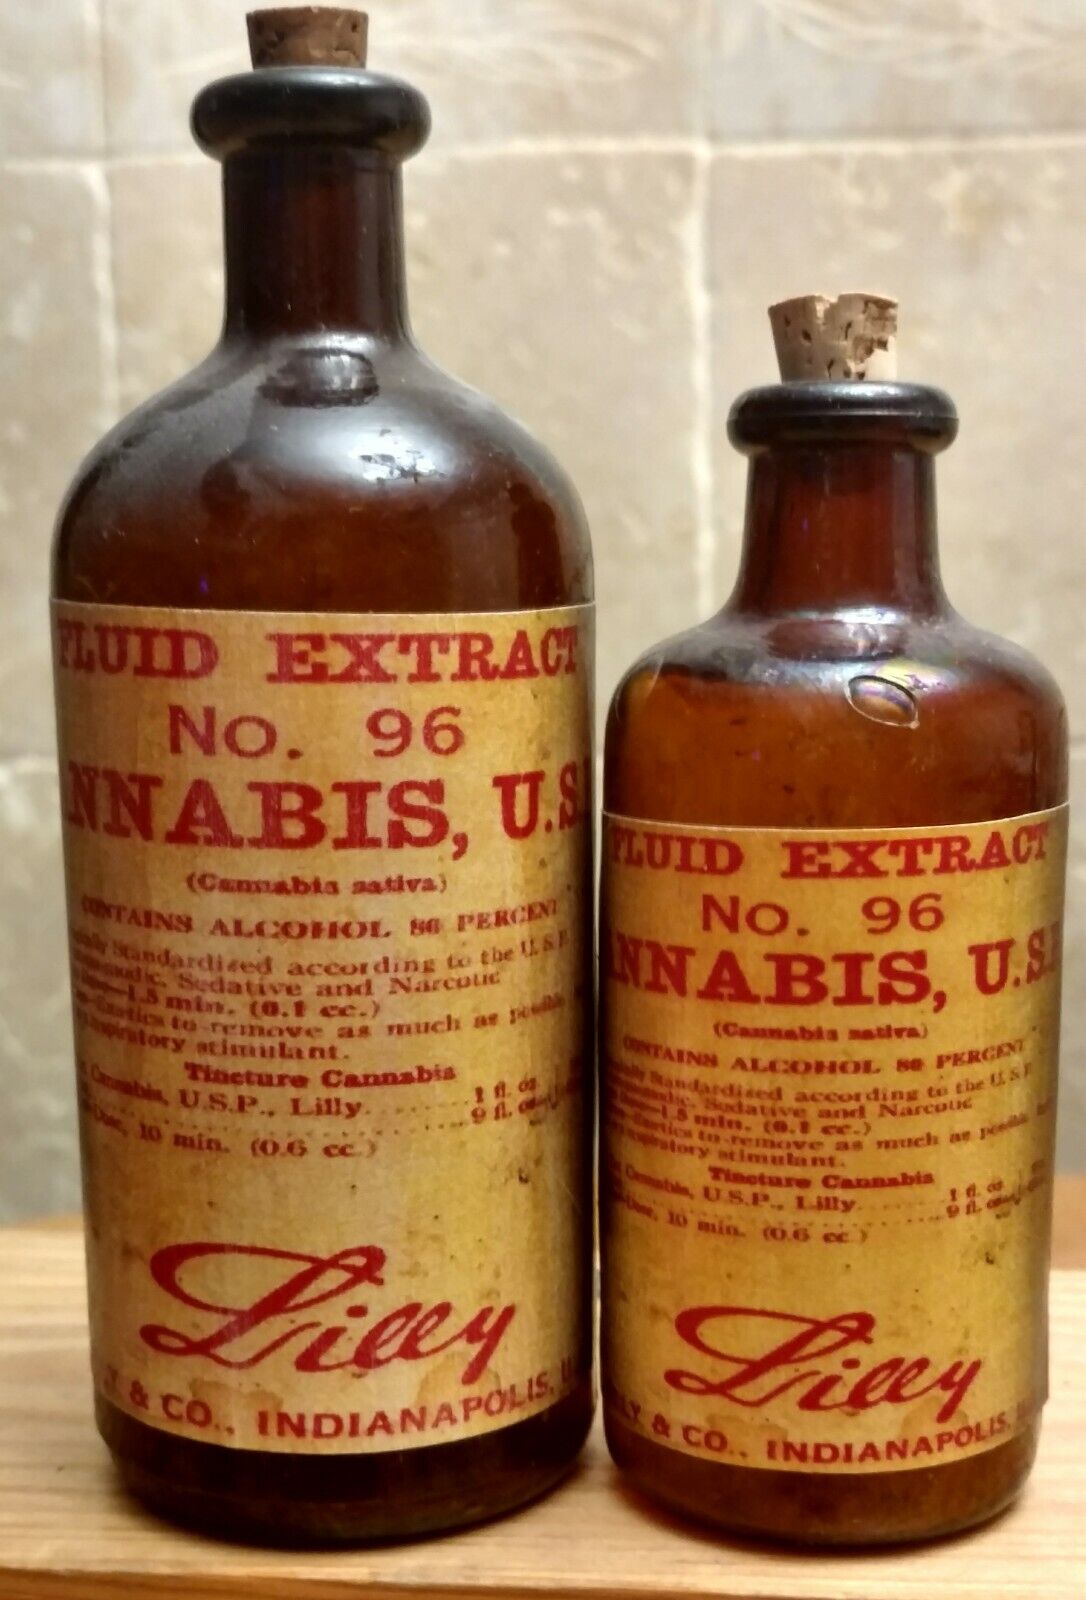 Vintage Medicine Hand Crafted Bottle, 2 Cannabis,Bottles are Real, Label Copied